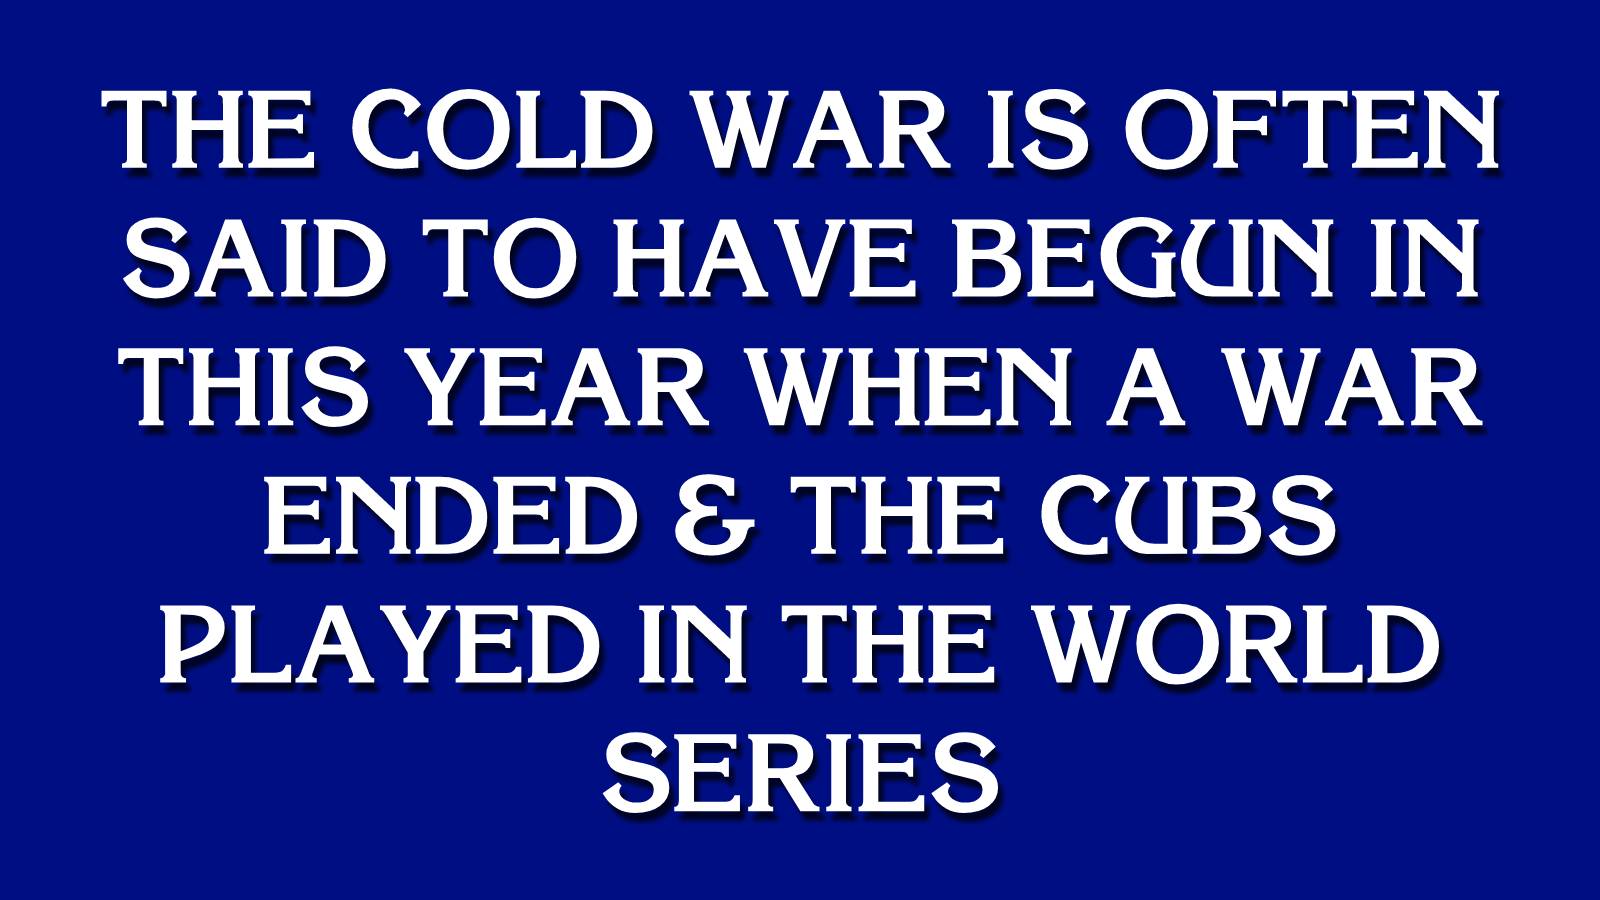 Do You Have the Smarts to Win This Game of “Jeopardy!”? Template Jeopardy 131